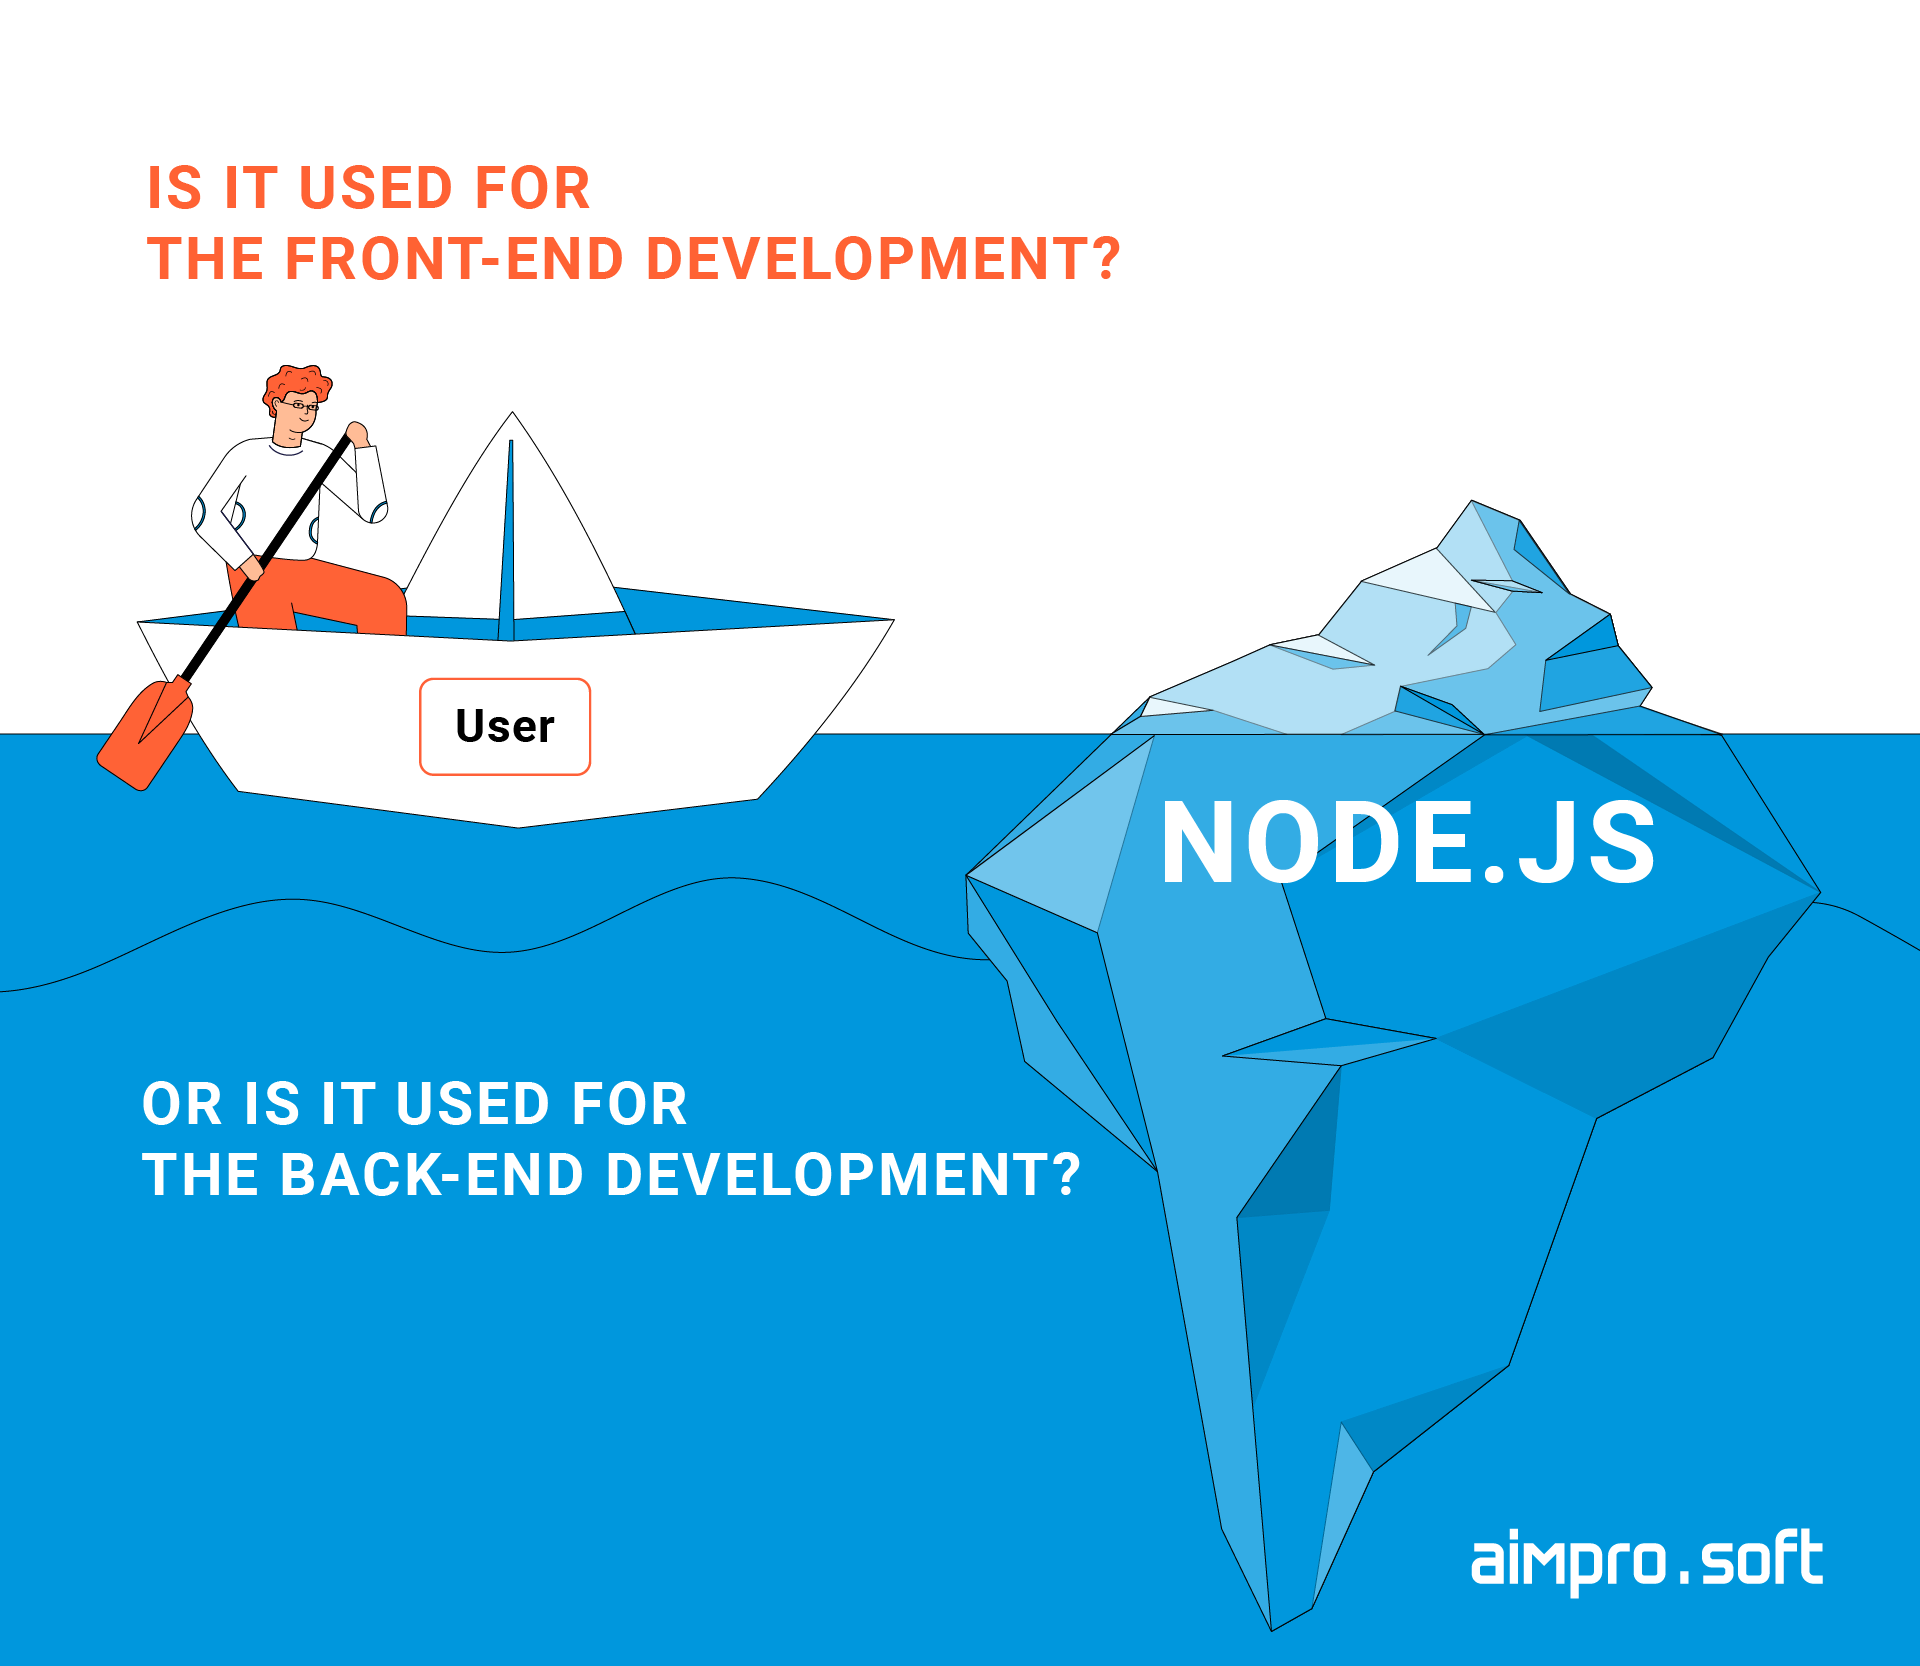 Is it better to use Node.js for the back-end or the front-end?